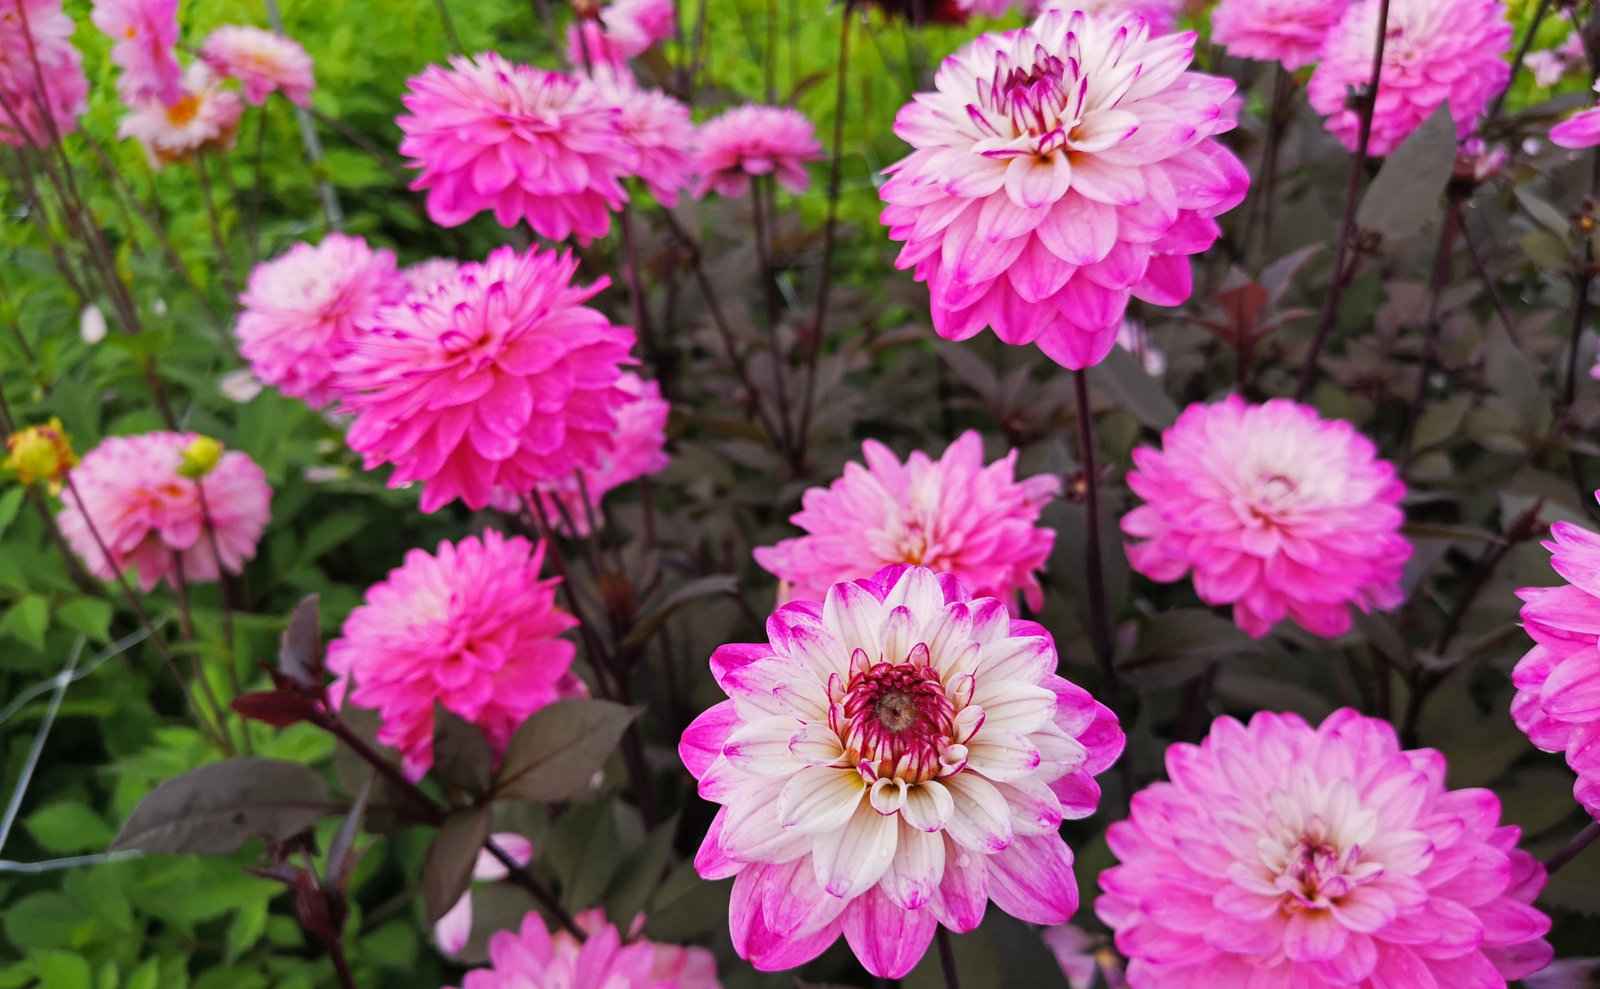 Experiencing Dahlia Fields in the Netherlands – a Summer Alternative to the Tulip Craze